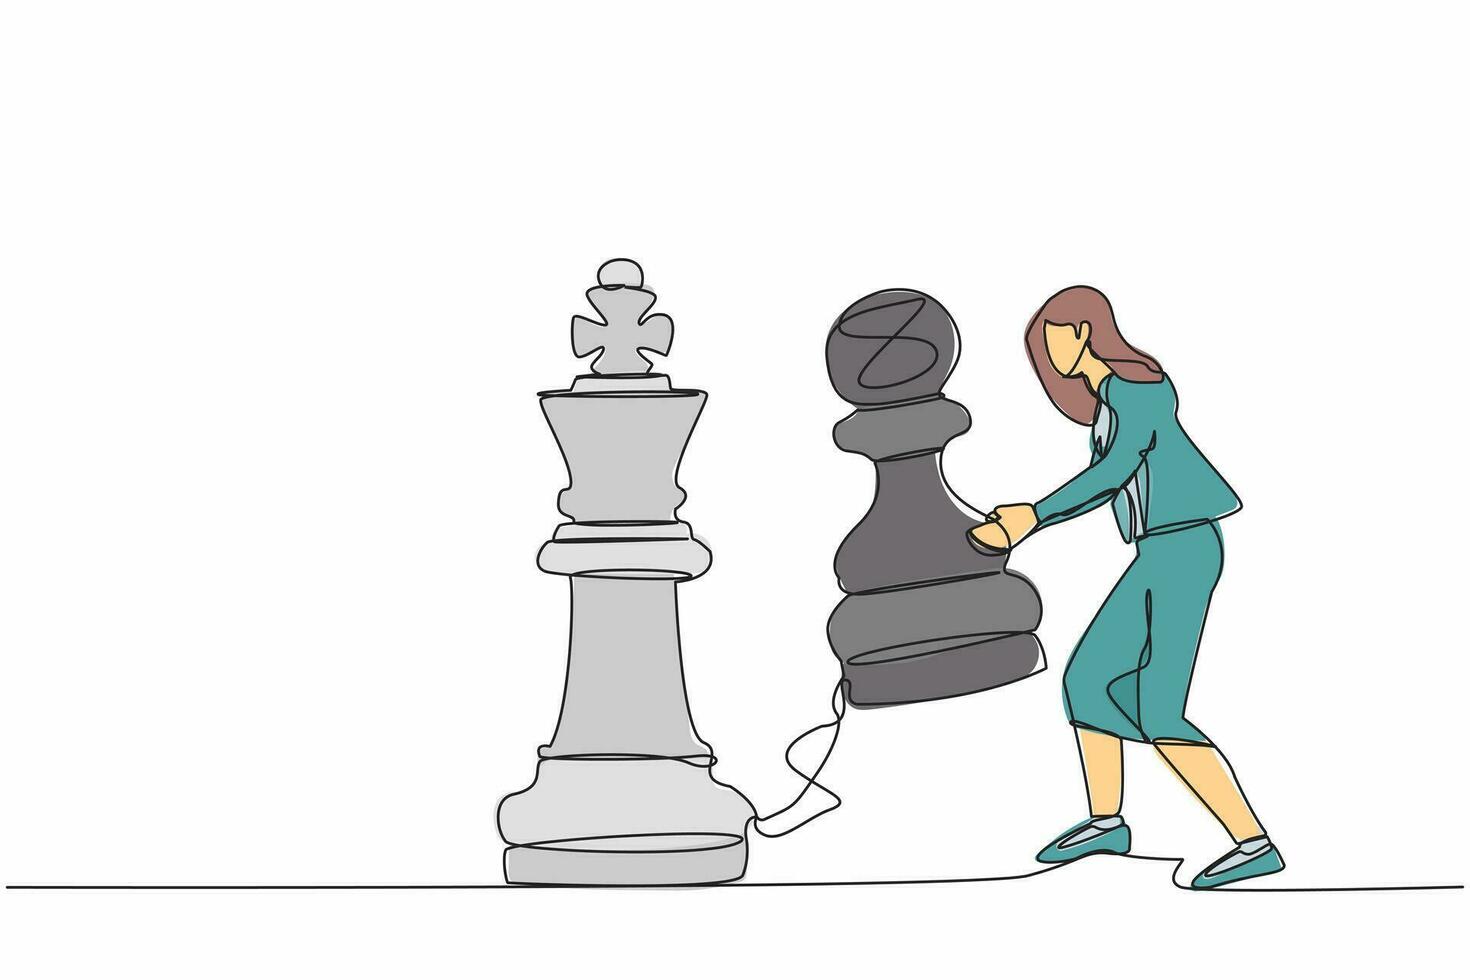 Continuous one line drawing businesswoman lifting pawn chess piece to beat king chess. Strategic planning, business development strategy, tactics in game. Single line draw design vector illustration